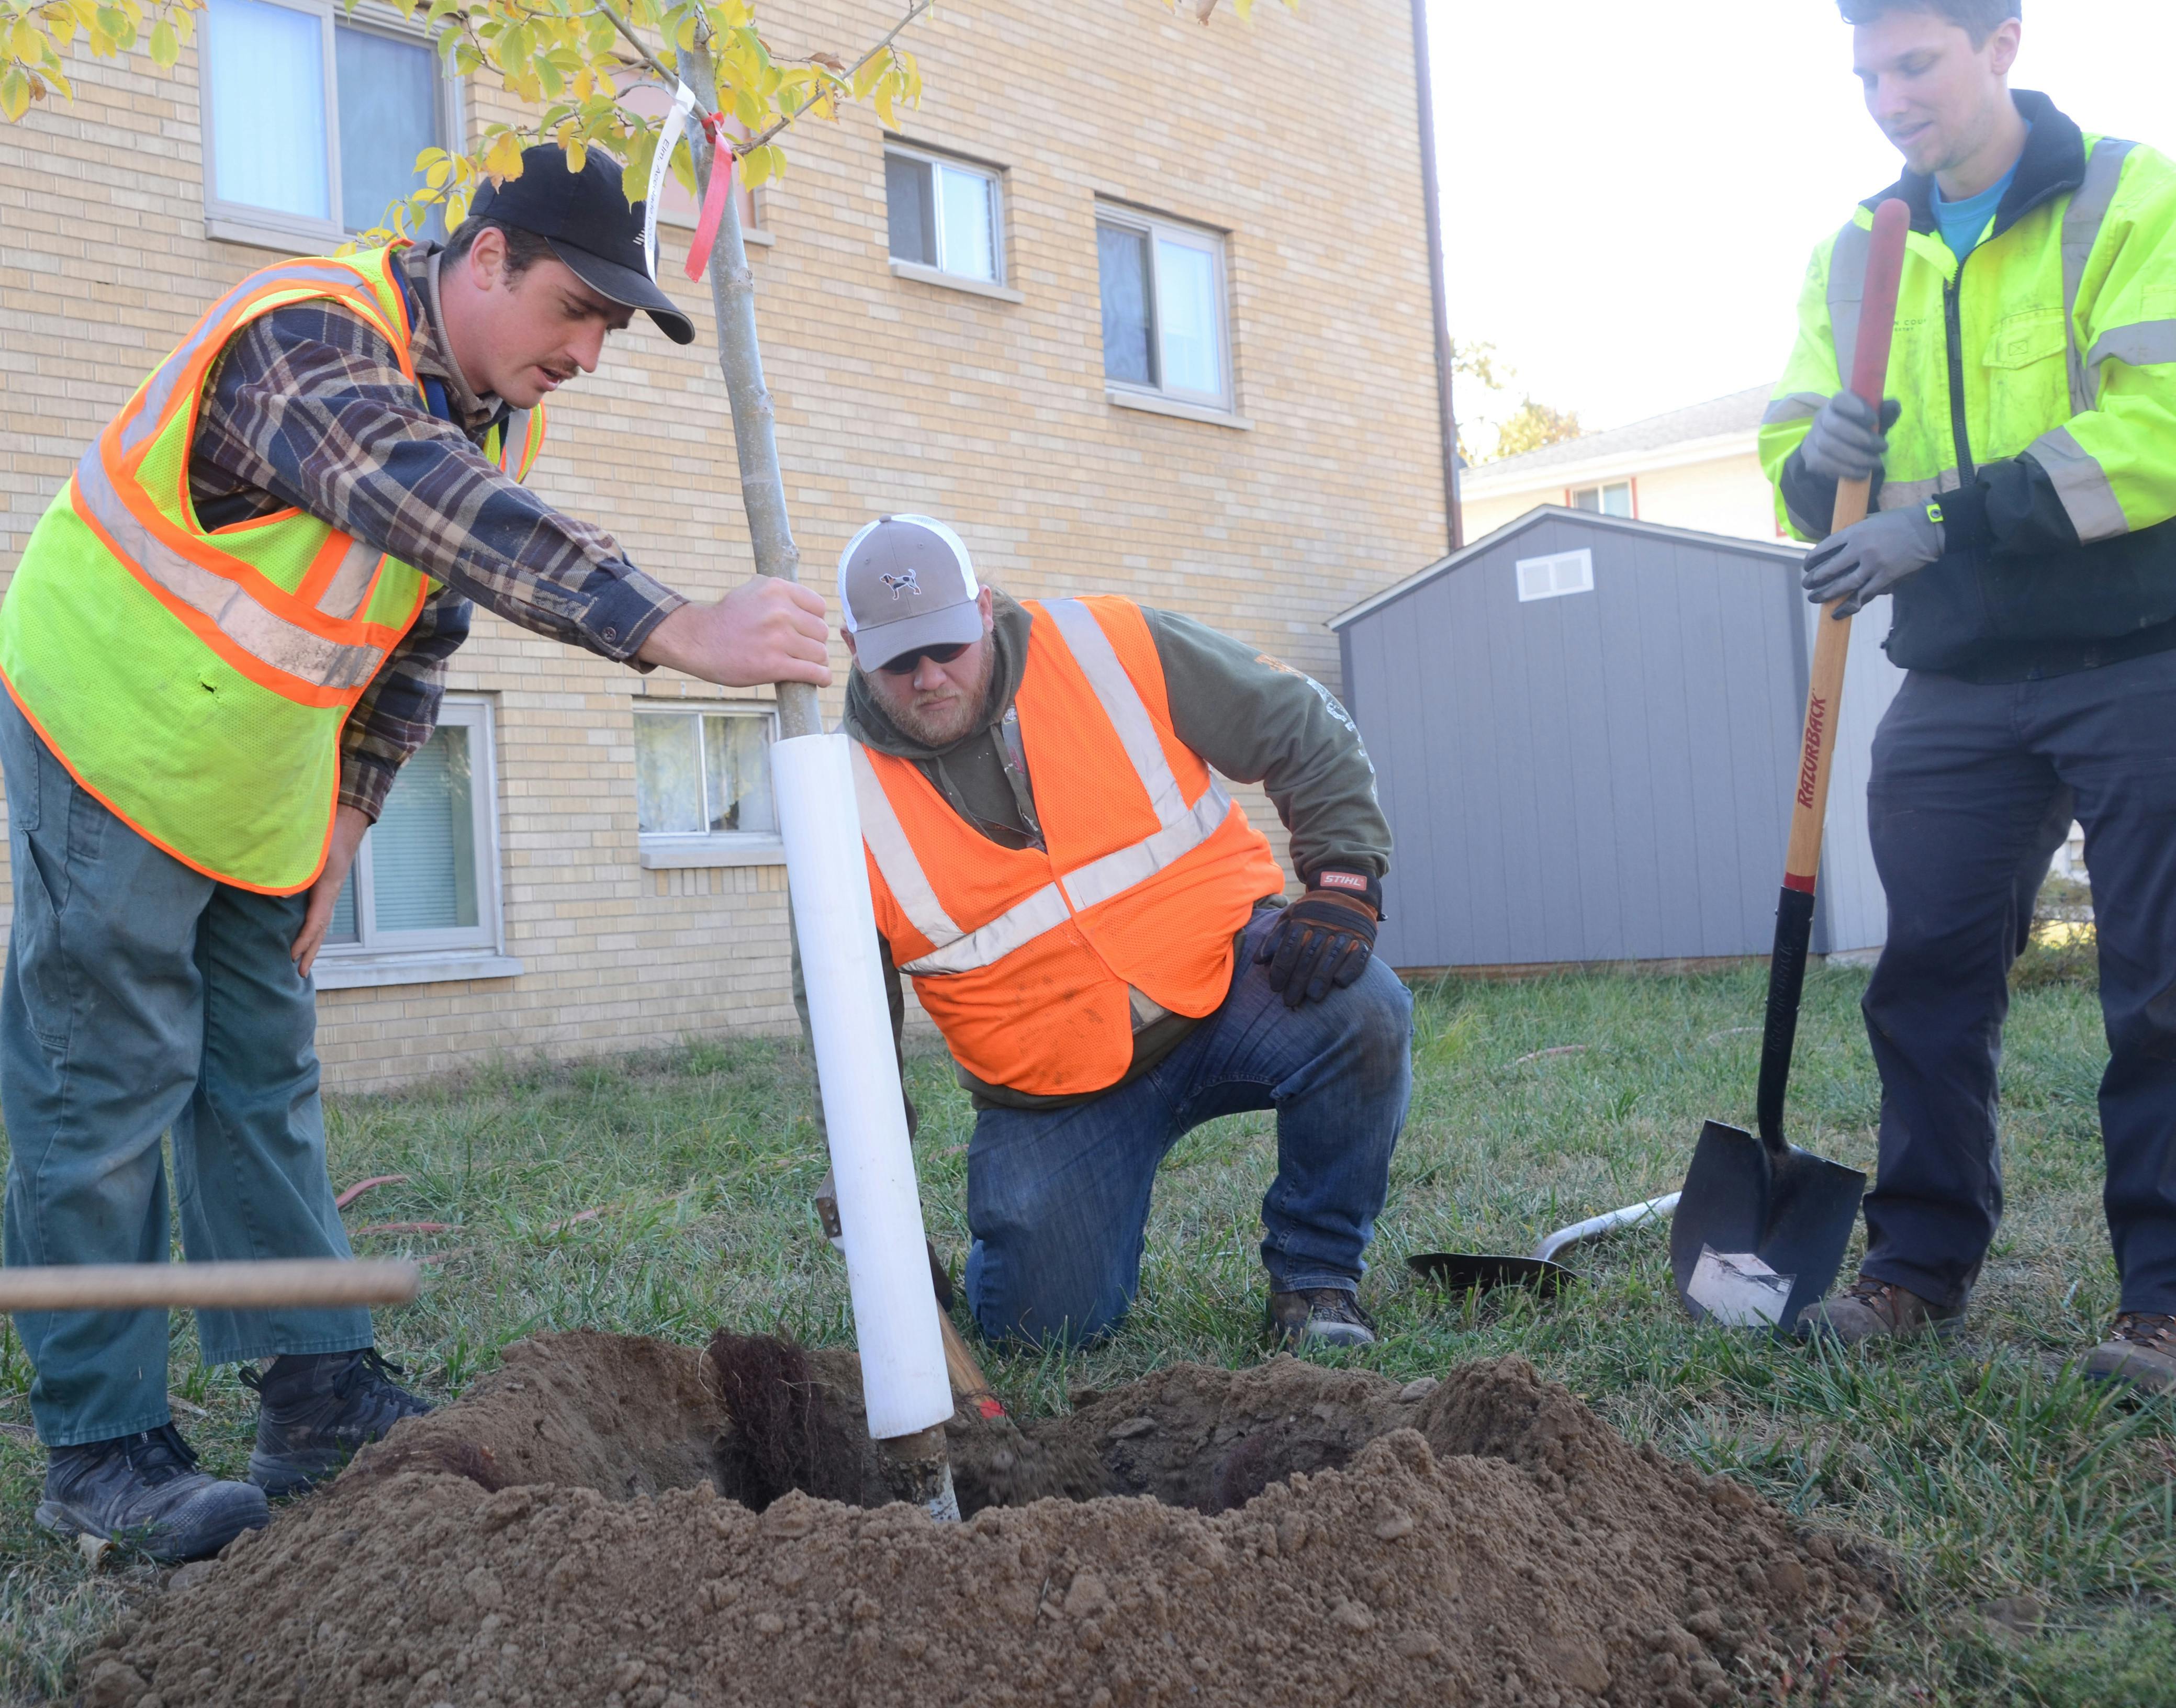 Three foresters work together to plant a tree next to an apartment building